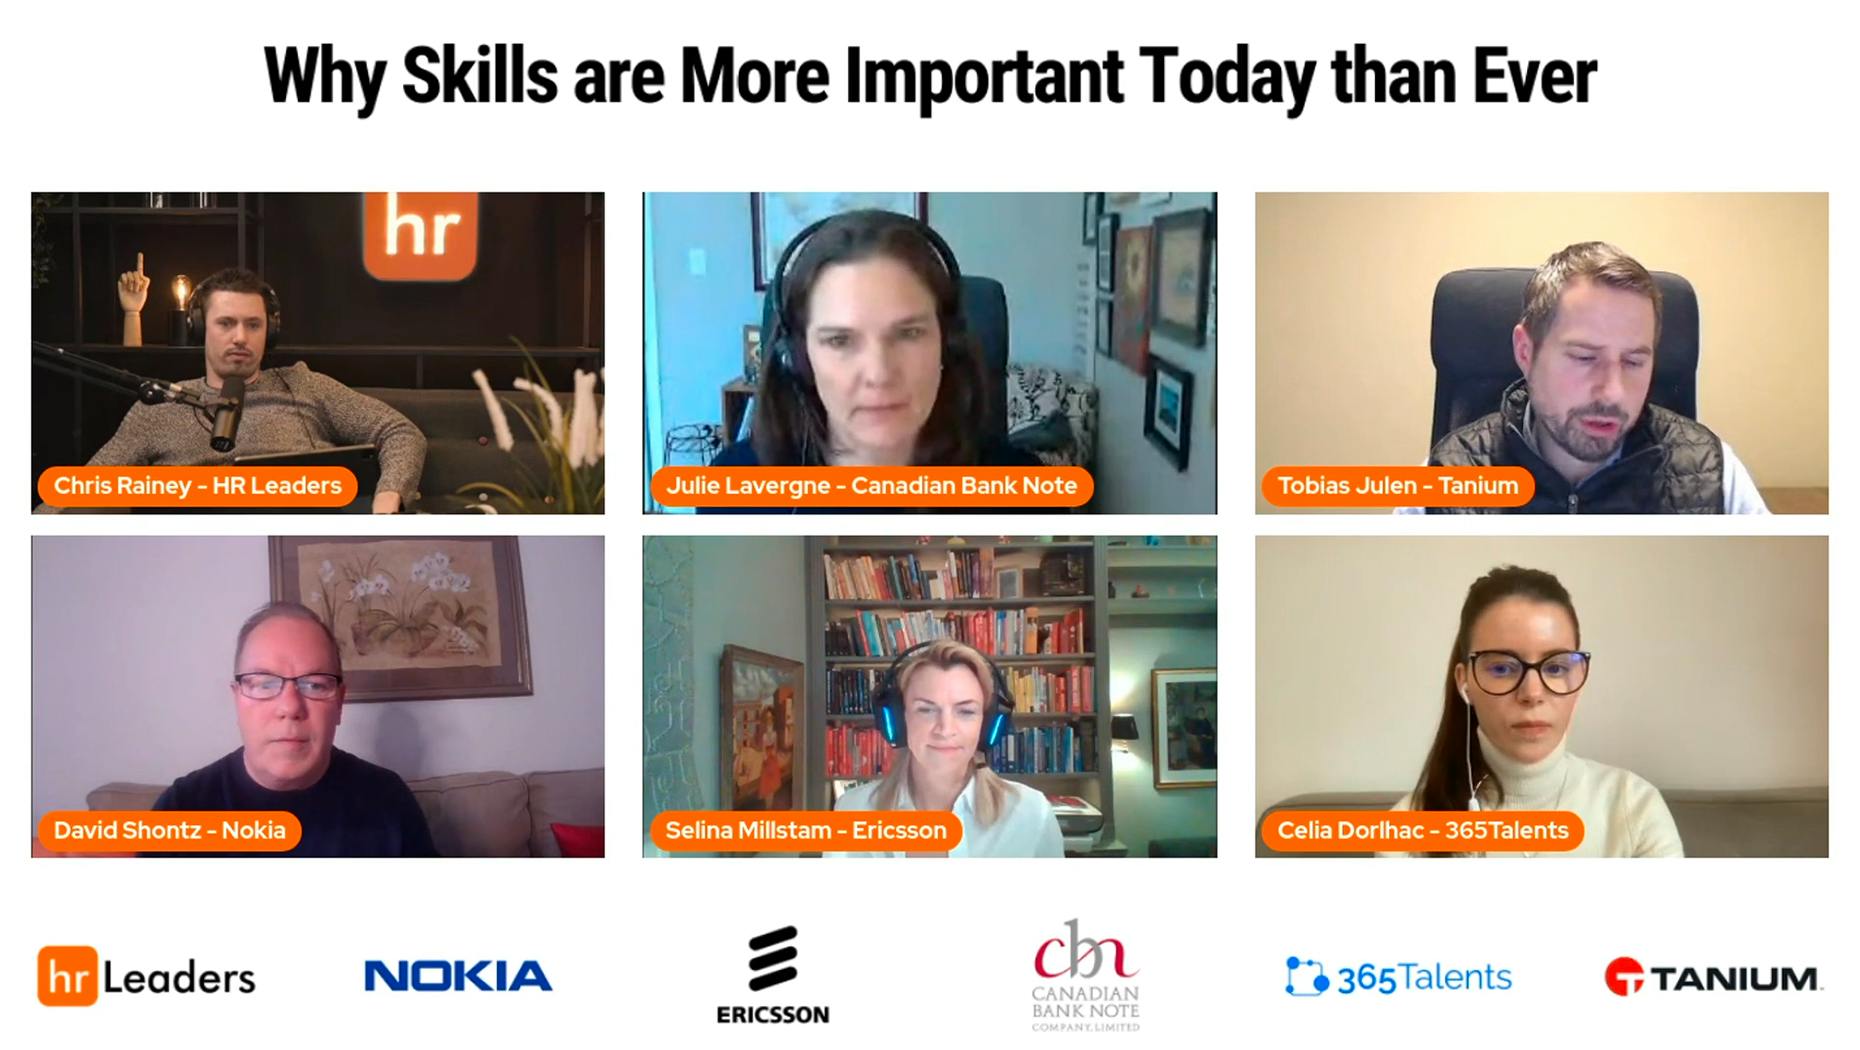 webinar-why-skills-more-important-today-than-ever-celia-dorlhac-hr-leaders